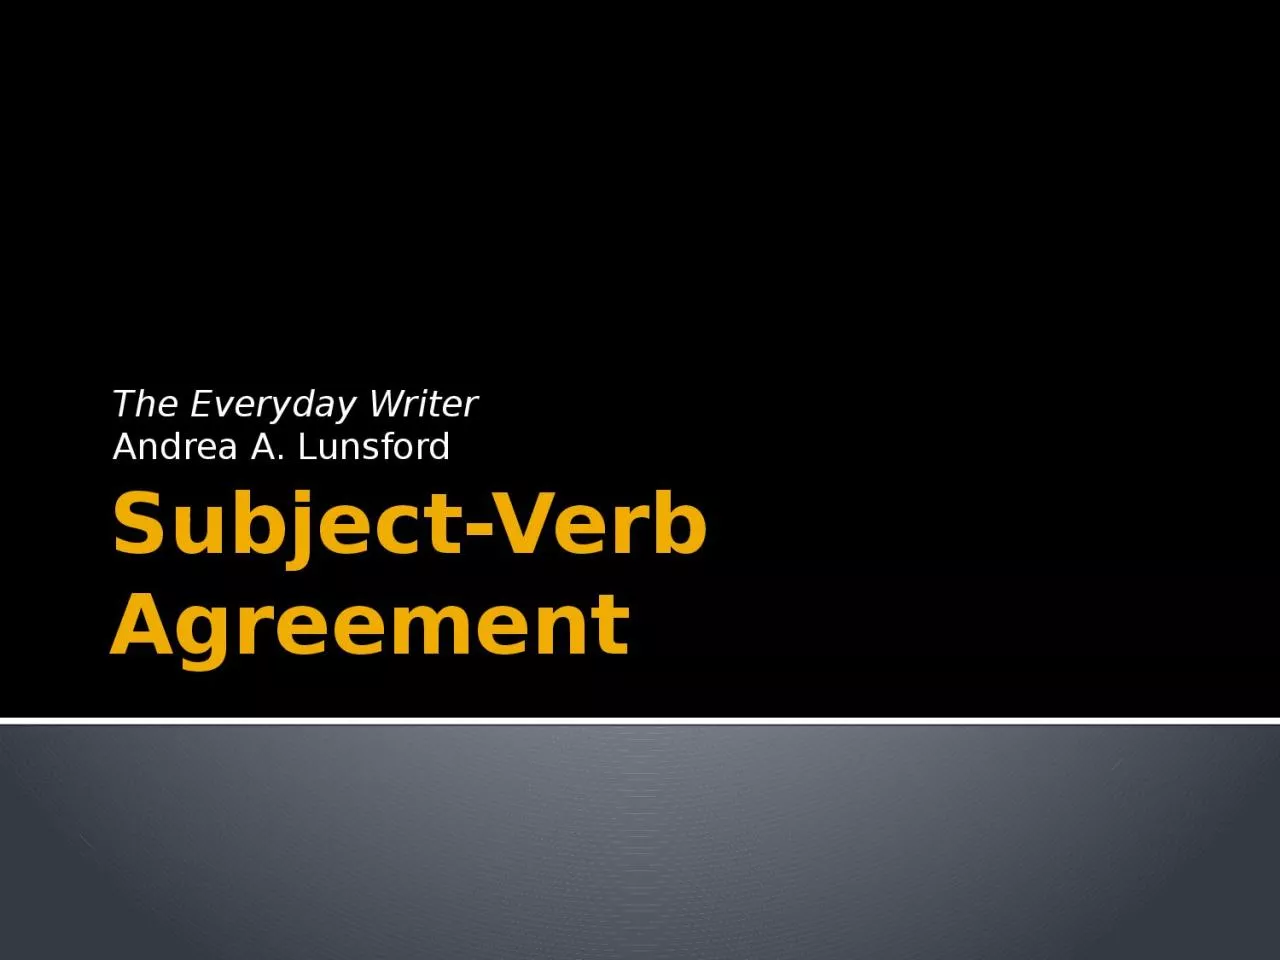 Subject-Verb Agreement The Everyday Writer